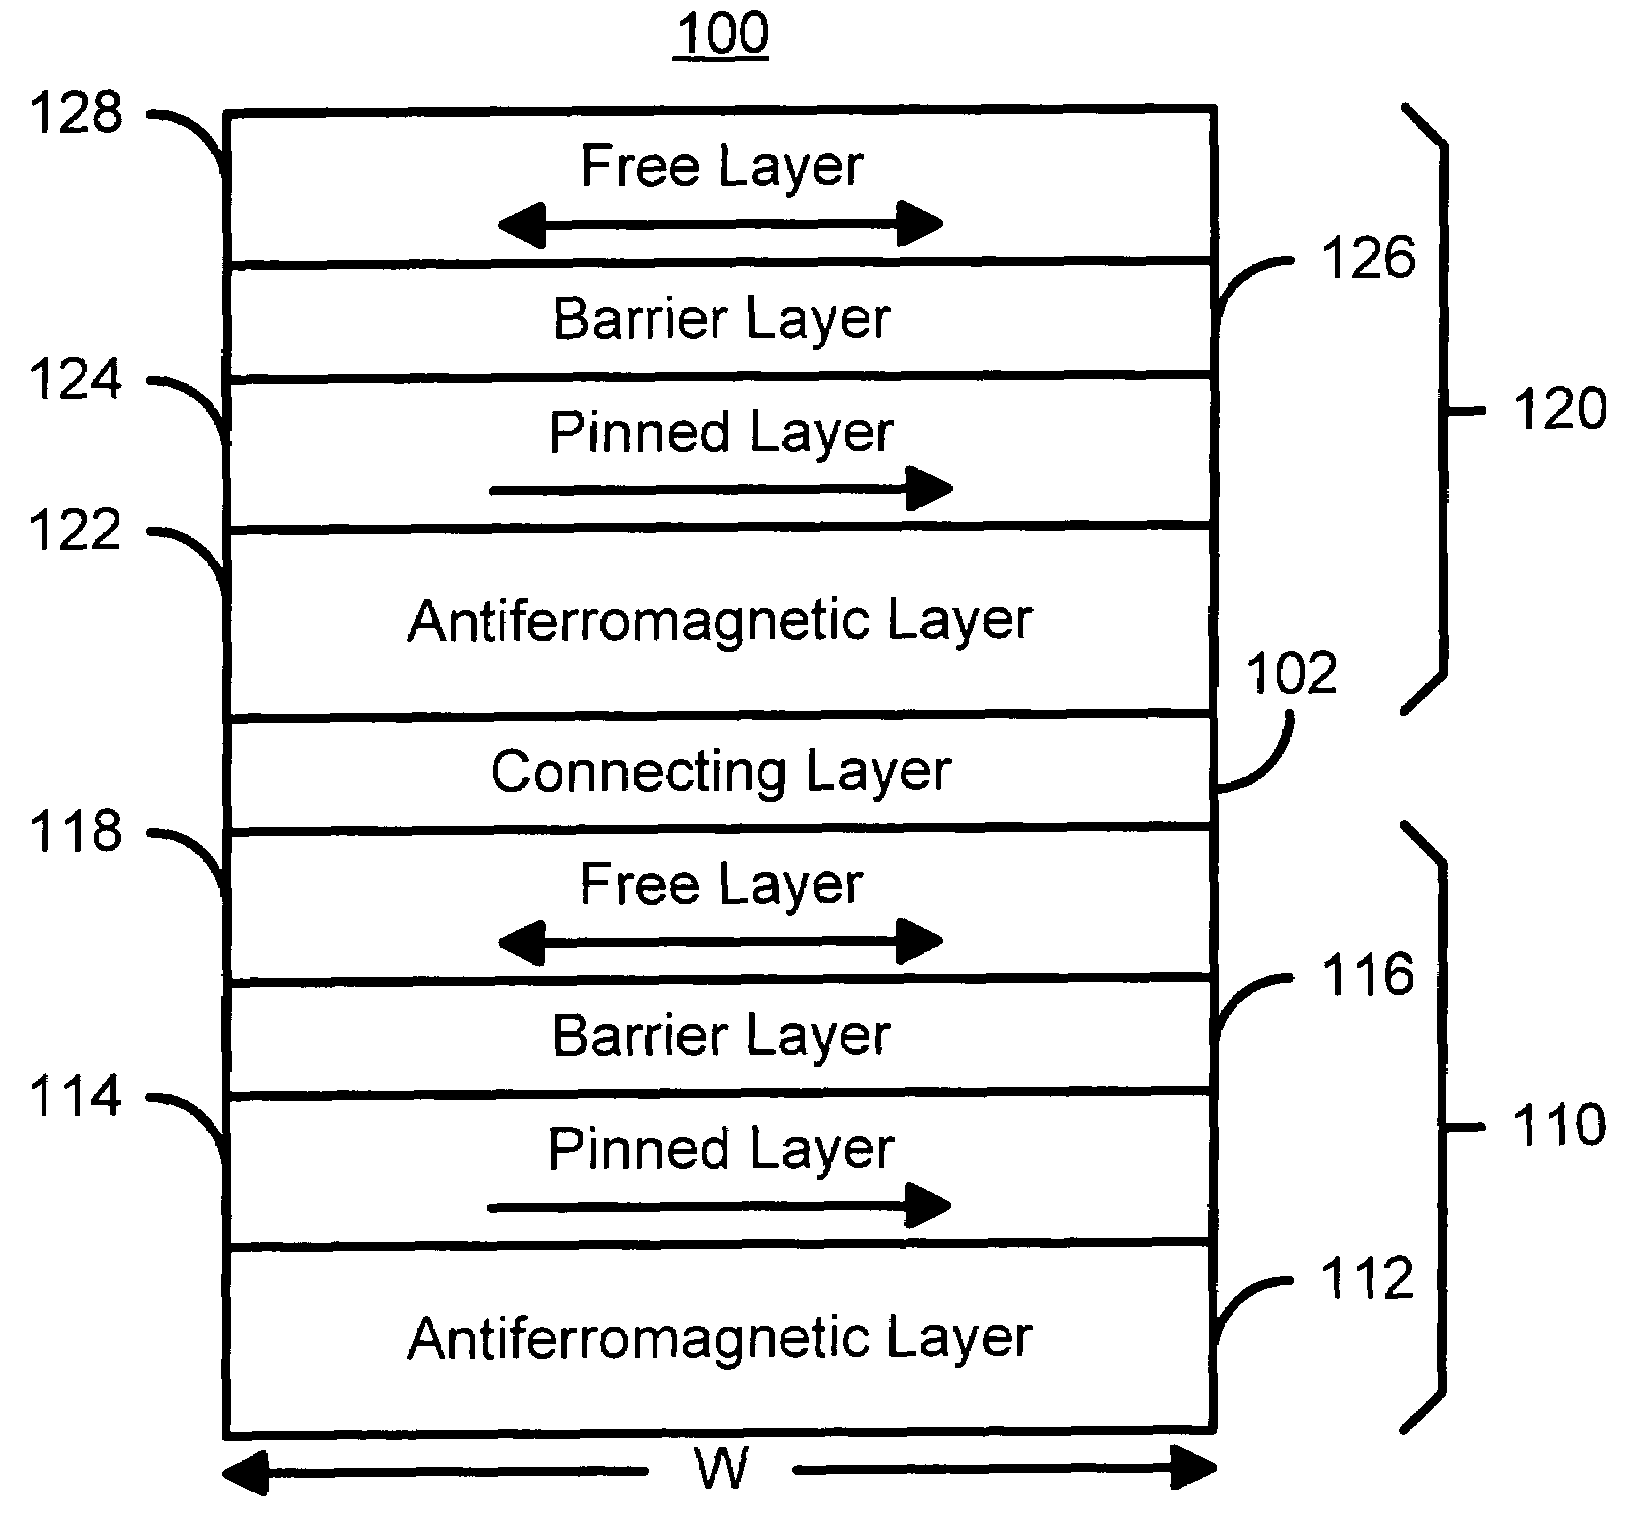 Magnetic memory element utilizing spin transfer switching and storing multiple bits